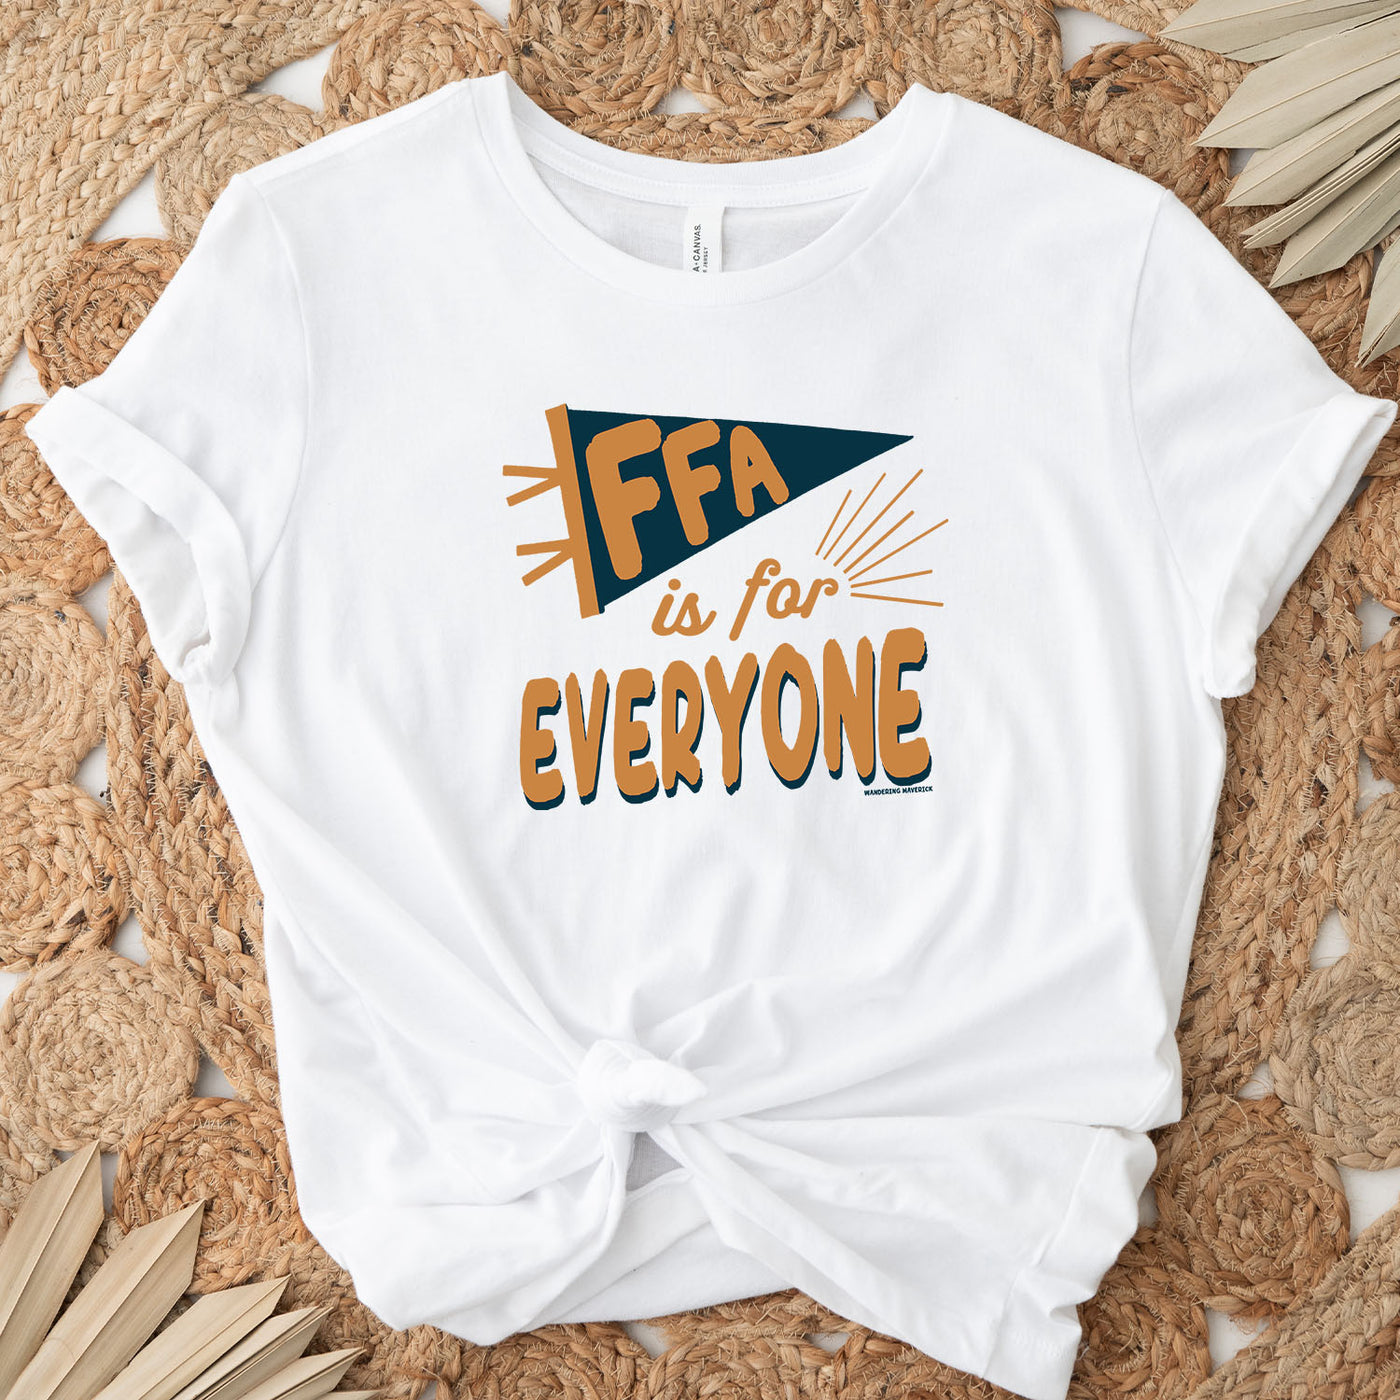 FFA is for everyone color ink T-Shirt (XS-4XL) - Multiple Colors!